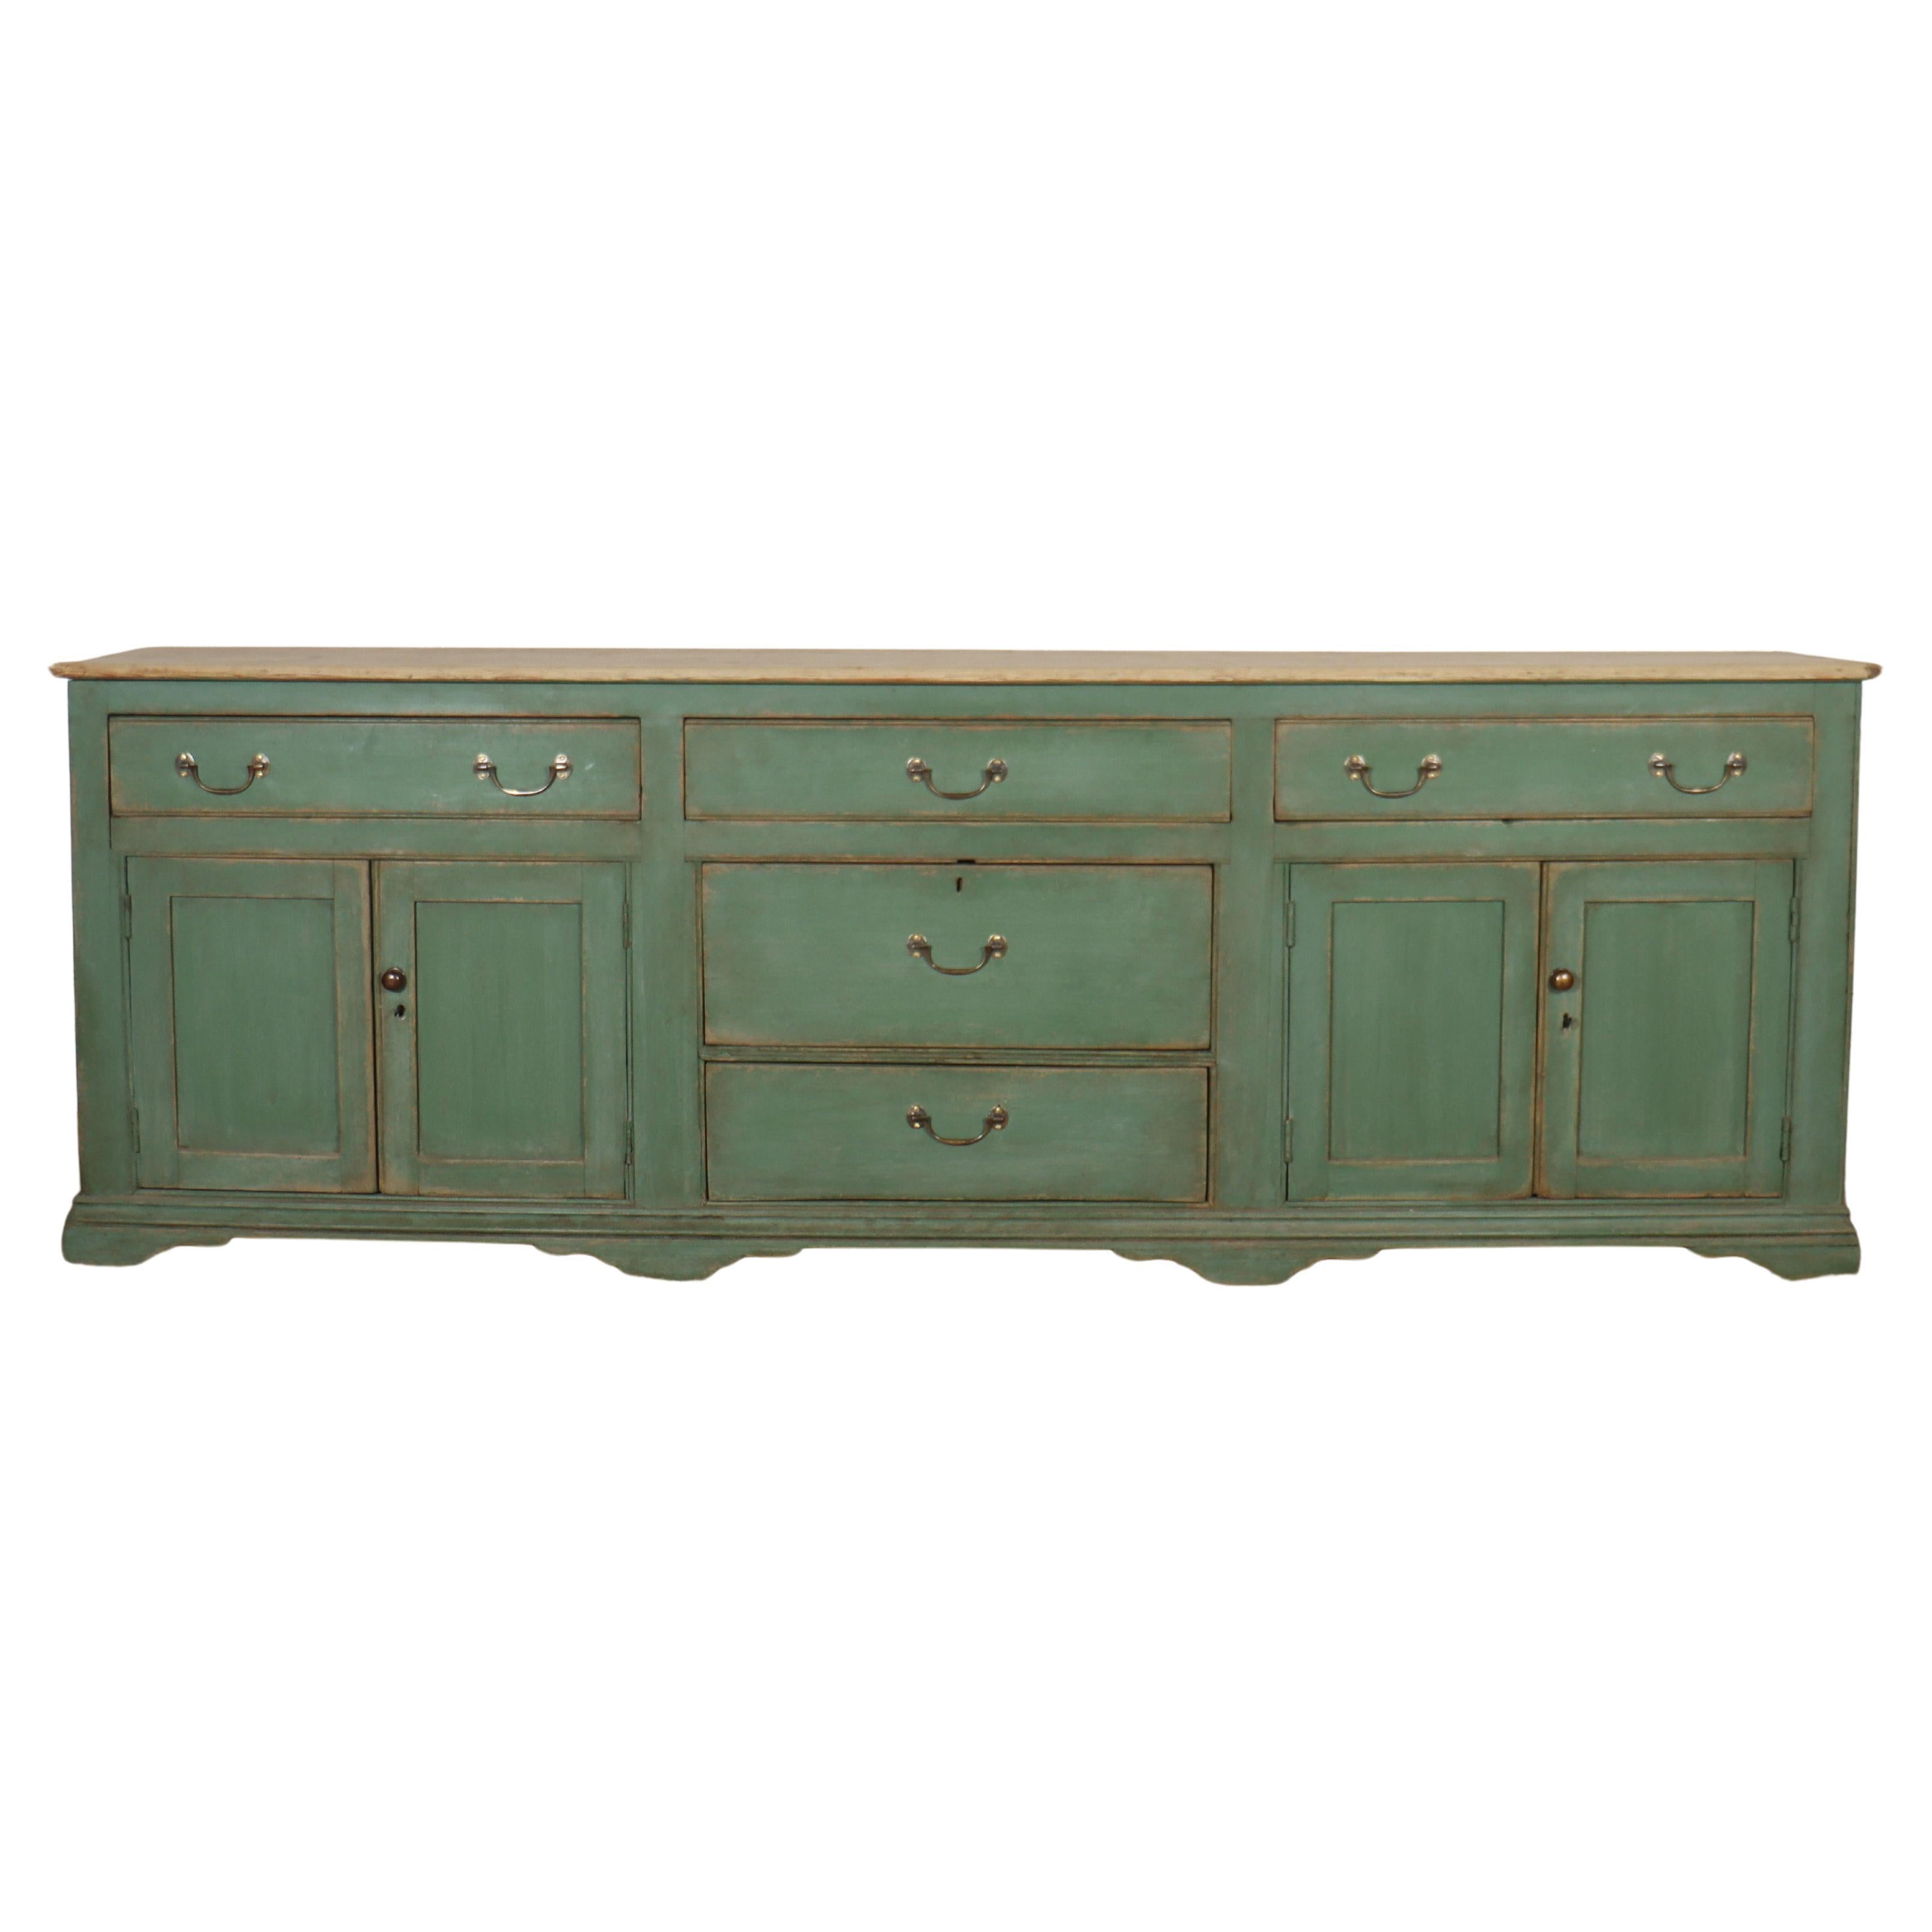 English Country House Dresser Base For Sale